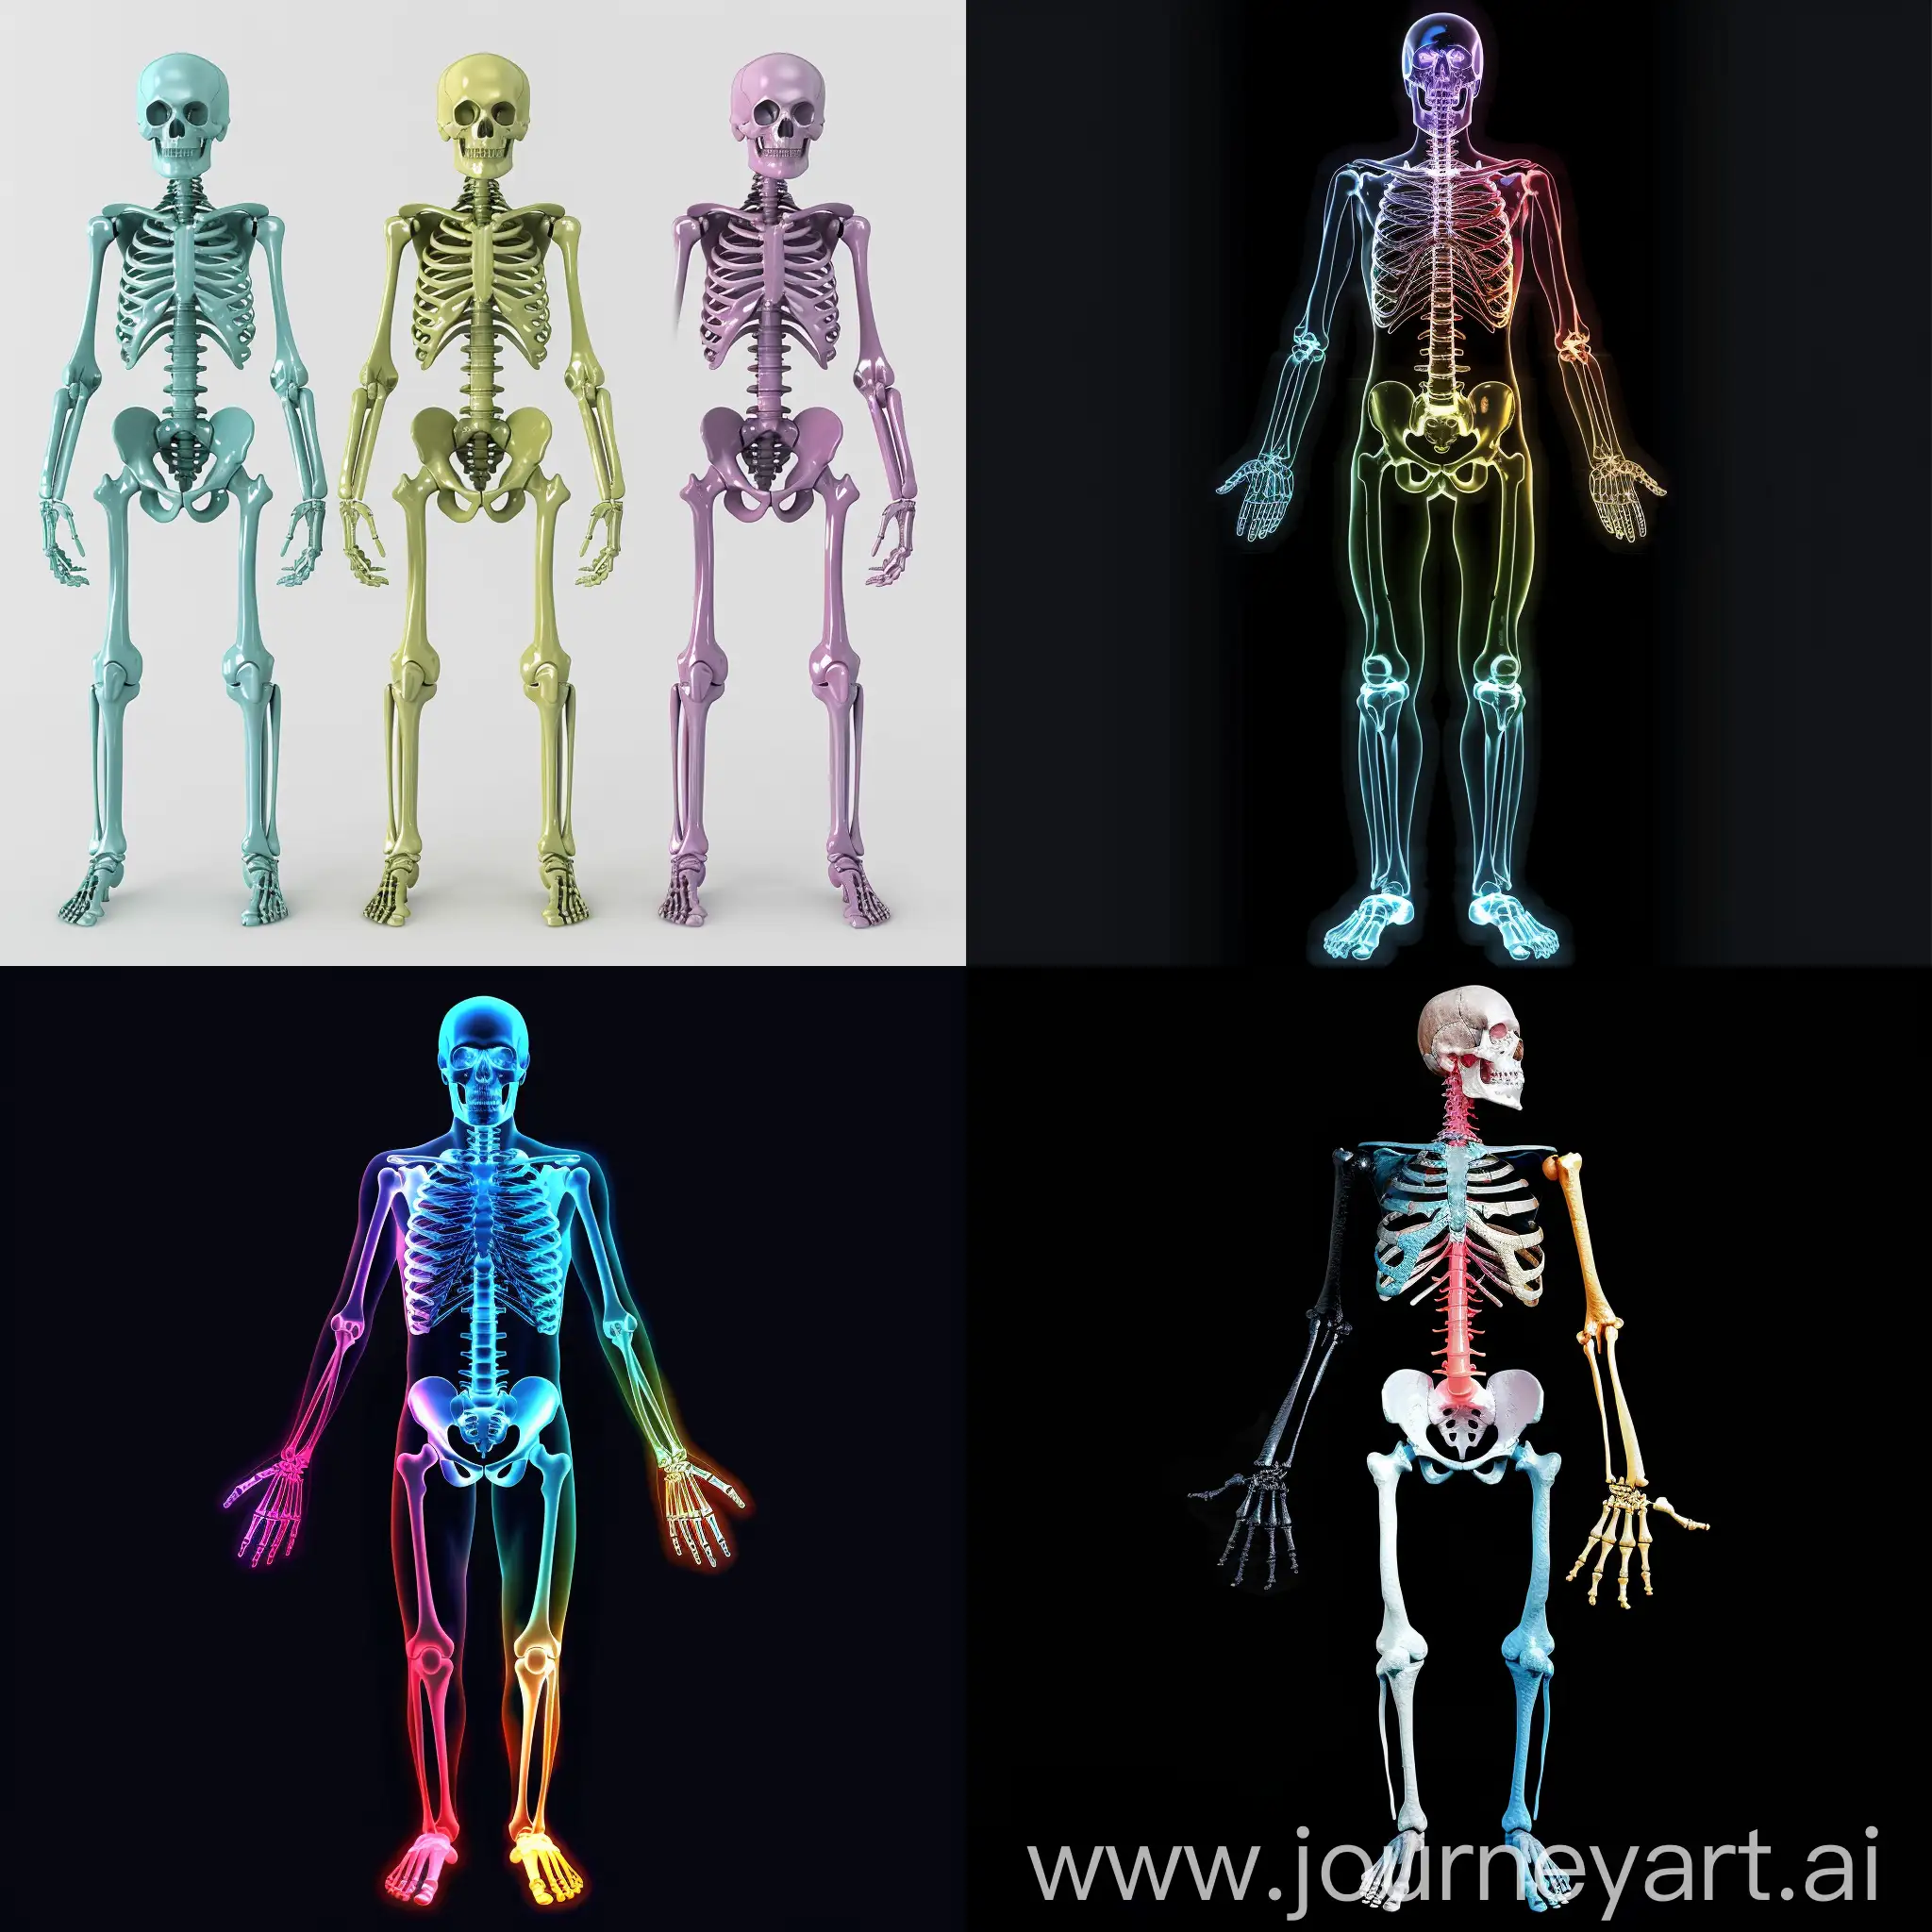 Vividly-Paired-Human-Skeleton-in-3D-Anatomical-Visualization-in-Spectral-Colors